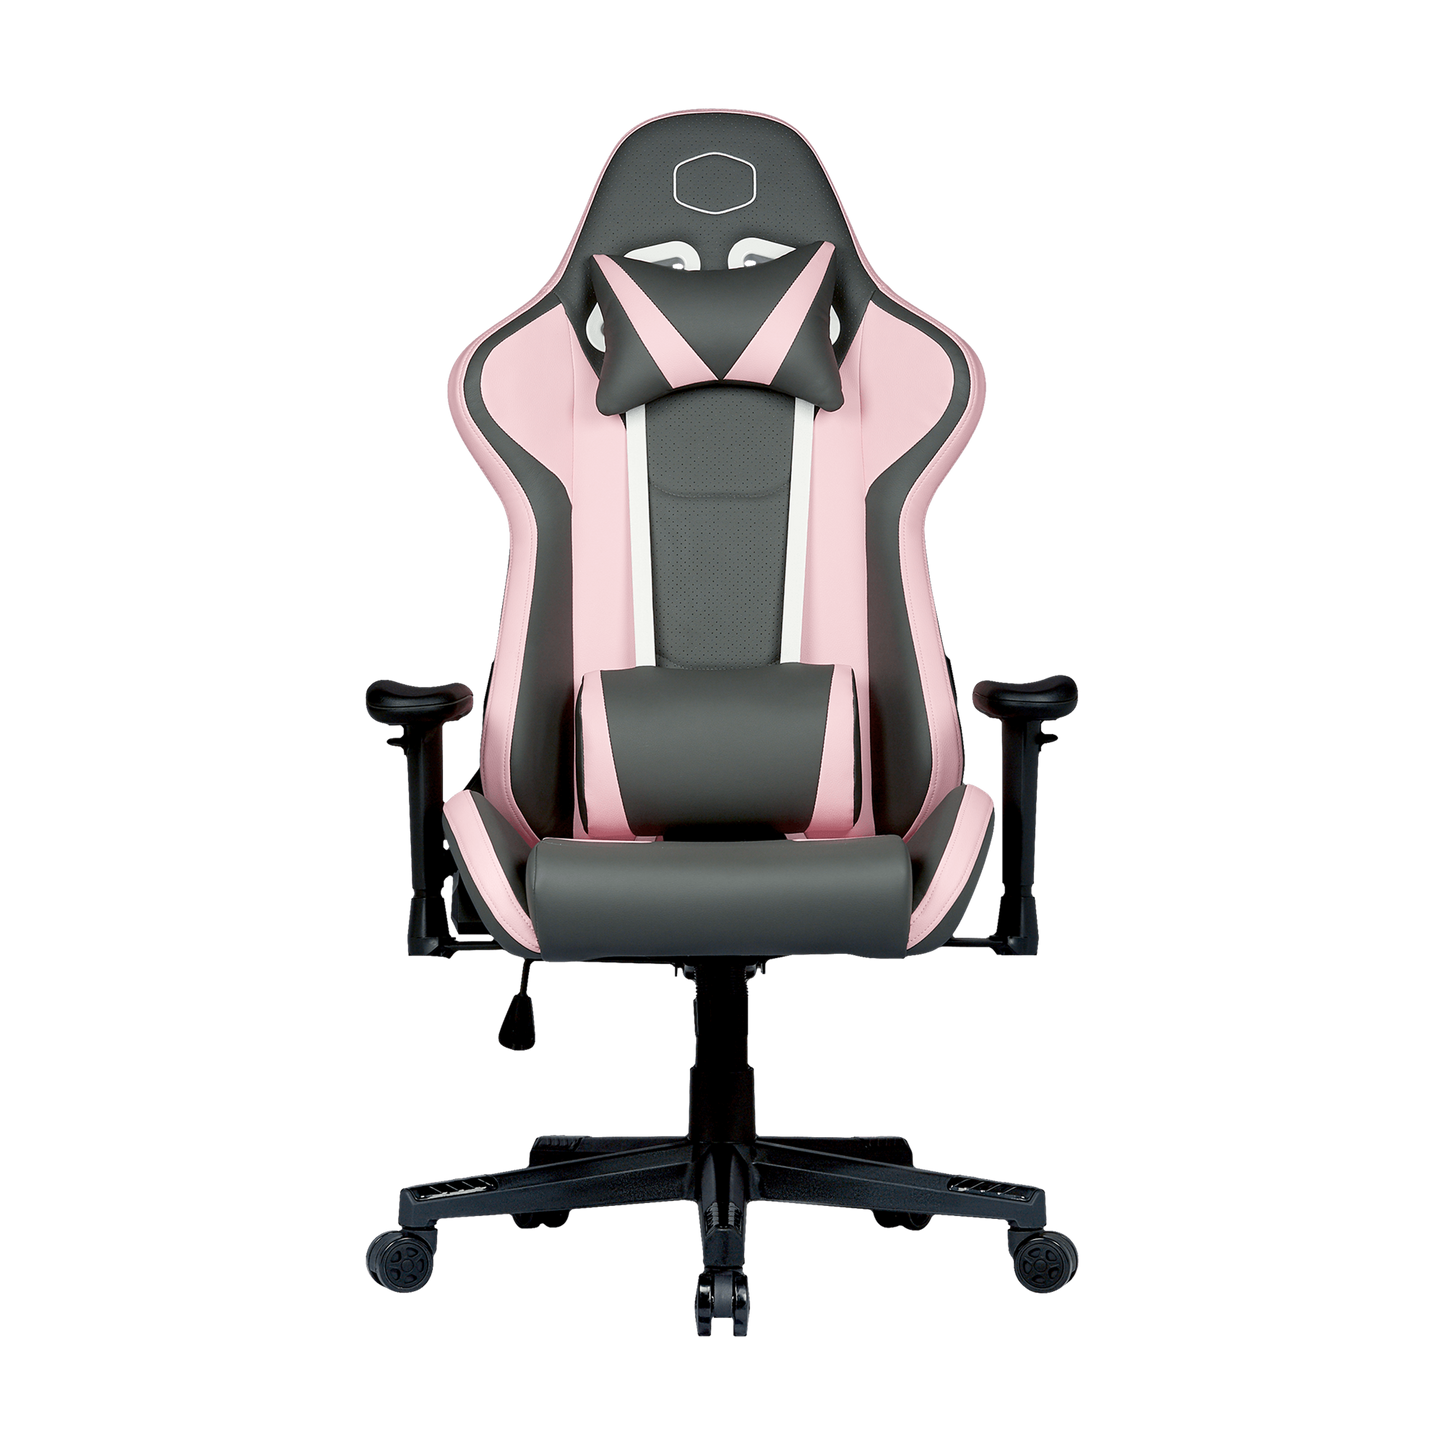 COOLER MASTER CALIBER R1S GAMING CHAIR PINK/GRAY